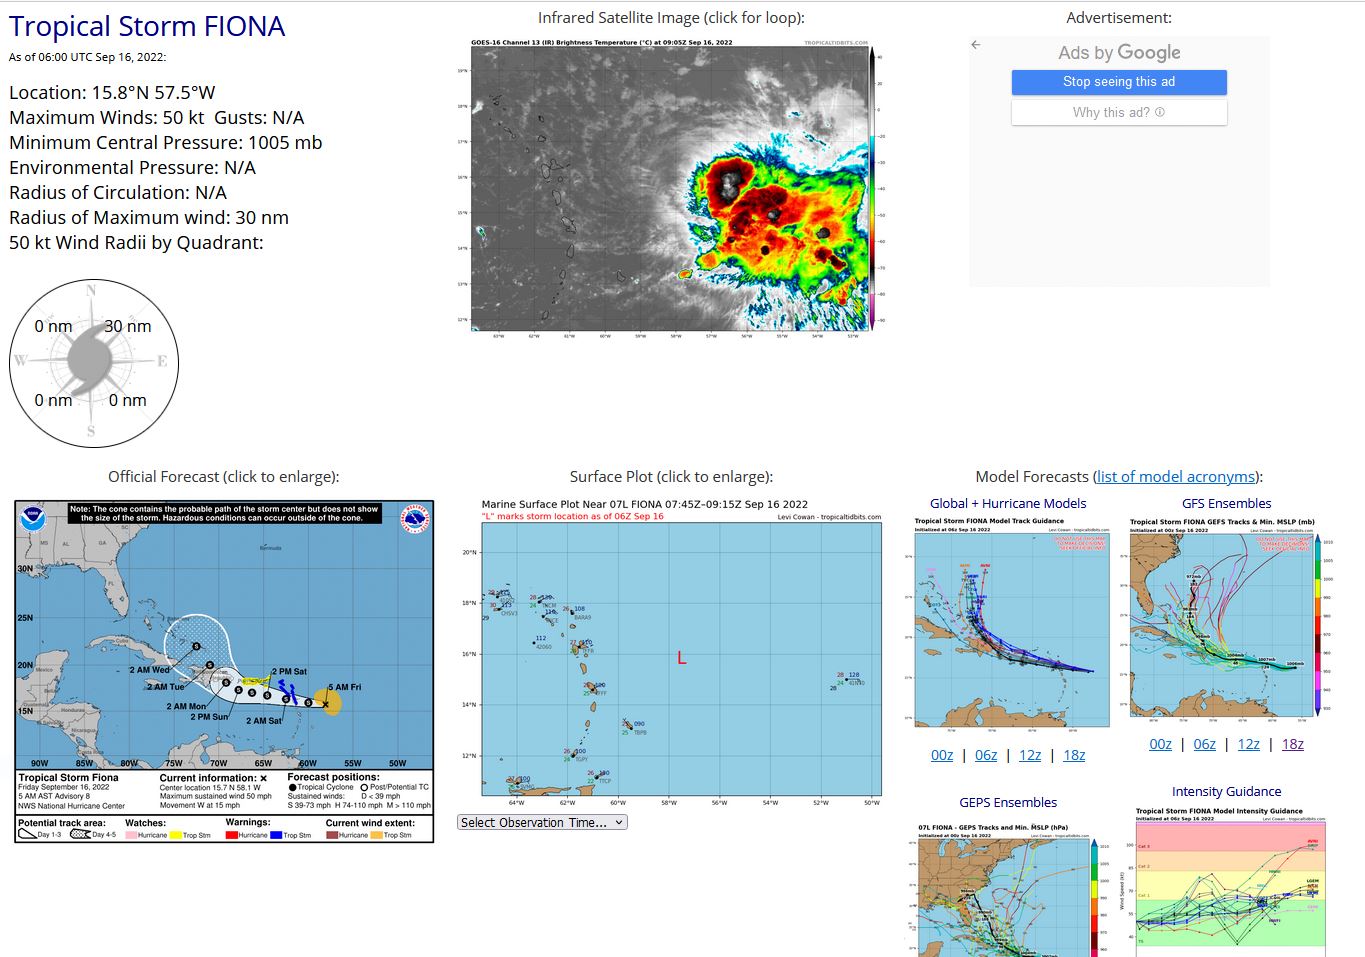 725  WTNT42 KNHC 160858 TCDAT2  Tropical Storm Fiona Discussion Number   8 NWS National Hurricane Center Miami FL       AL072022 500 AM AST Fri Sep 16 2022  Fiona remains a sheared tropical cyclone this morning. The center of  the storm is fully exposed to the west of a large area of deep  convection over much of the eastern portion of the circulation. An  Air Force Reserve Hurricane Hunter aircraft that investigated Fiona  found peak 925 mb flight-level winds of 60 kt, which would support a  surface wind of about 45 kt using a standard reduction factor.  Meanwhile, the SFMR data only supported surface winds of 35-40 kt.  Earlier scatterometer data showed an area of winds slightly above 40  kt in the northeastern quadrant of the storm. Based on these data,  the initial intensity is set at 45 kt for this advisory.  The latest aircraft fixes indicate that Fiona is still moving south  of due west, and its initial motion is estimated to be 260/13 kt.  The models agree that Fiona should move generally westward over the  next couple of days, to the south of the subtropical ridge across  the central and western Atlantic. This brings the center of the  storm across the Leeward Islands tonight and near the Virgin Islands  and Puerto Rico on Saturday through early Sunday. Then, a turn  toward the west-northwest and northwest is forecast as the storm  reaches a weakness in the steering ridge. This would bring the  center of Fiona near or over Hispaniola on Monday and then into the  southwestern Atlantic by days 4-5. The NHC track forecast has once  again been adjusted slightly south of the previous one in the near  term, but generally lies near the center of the guidance envelope on  days 3-5.  Some short-term intensity fluctuations are possible given the  sheared, asymmetric structure of the storm. However, there are some  indications that the environmental conditions could become more  conducive for strengthening as the storm moves into the eastern  Caribbean this weekend. In particular, increasing upper-level  divergence and mid-level moisture along with decreasing vertical  wind shear could allow Fiona to become better organized before it  reaches Hispaniola. The latest NHC intensity forecast shows a bit  more strengthening through 72 h, but still lies slightly below the  guidance consensus. From there, the intensity forecast is of lower  confidence as the extent of land interaction is still uncertain.   Key Messages:  1. Tropical storm conditions are expected in the Leeward Islands within the warning area by this evening. Tropical storm conditions are possible within the watch area across the Virgin Islands beginning on Saturday, and then reaching Puerto Rico late Saturday and Saturday night.  2. Heavy rains from Fiona will reach the Leeward Islands by this evening, spreading to the British and U.S. Virgin Islands and Puerto Rico Saturday, reaching the Dominican Republic Sunday, and the Turks and Caicos Monday night or Tuesday. This rainfall may produce considerable flood impacts including flash and urban flooding, along with mudslides in areas of higher terrain.  3. Fiona is expected to move near Hispaniola early next week, and watches could be required for parts of the island later today.   FORECAST POSITIONS AND MAX WINDS  INIT  16/0900Z 15.7N  58.1W   45 KT  50 MPH  12H  16/1800Z 15.9N  60.0W   50 KT  60 MPH  24H  17/0600Z 16.3N  62.5W   50 KT  60 MPH  36H  17/1800Z 16.7N  64.6W   55 KT  65 MPH  48H  18/0600Z 17.0N  66.3W   55 KT  65 MPH  60H  18/1800Z 17.3N  67.8W   60 KT  70 MPH  72H  19/0600Z 18.1N  69.2W   60 KT  70 MPH  96H  20/0600Z 20.0N  71.0W   55 KT  65 MPH 120H  21/0600Z 22.0N  72.5W   60 KT  70 MPH  $$ Forecaster Reinhart